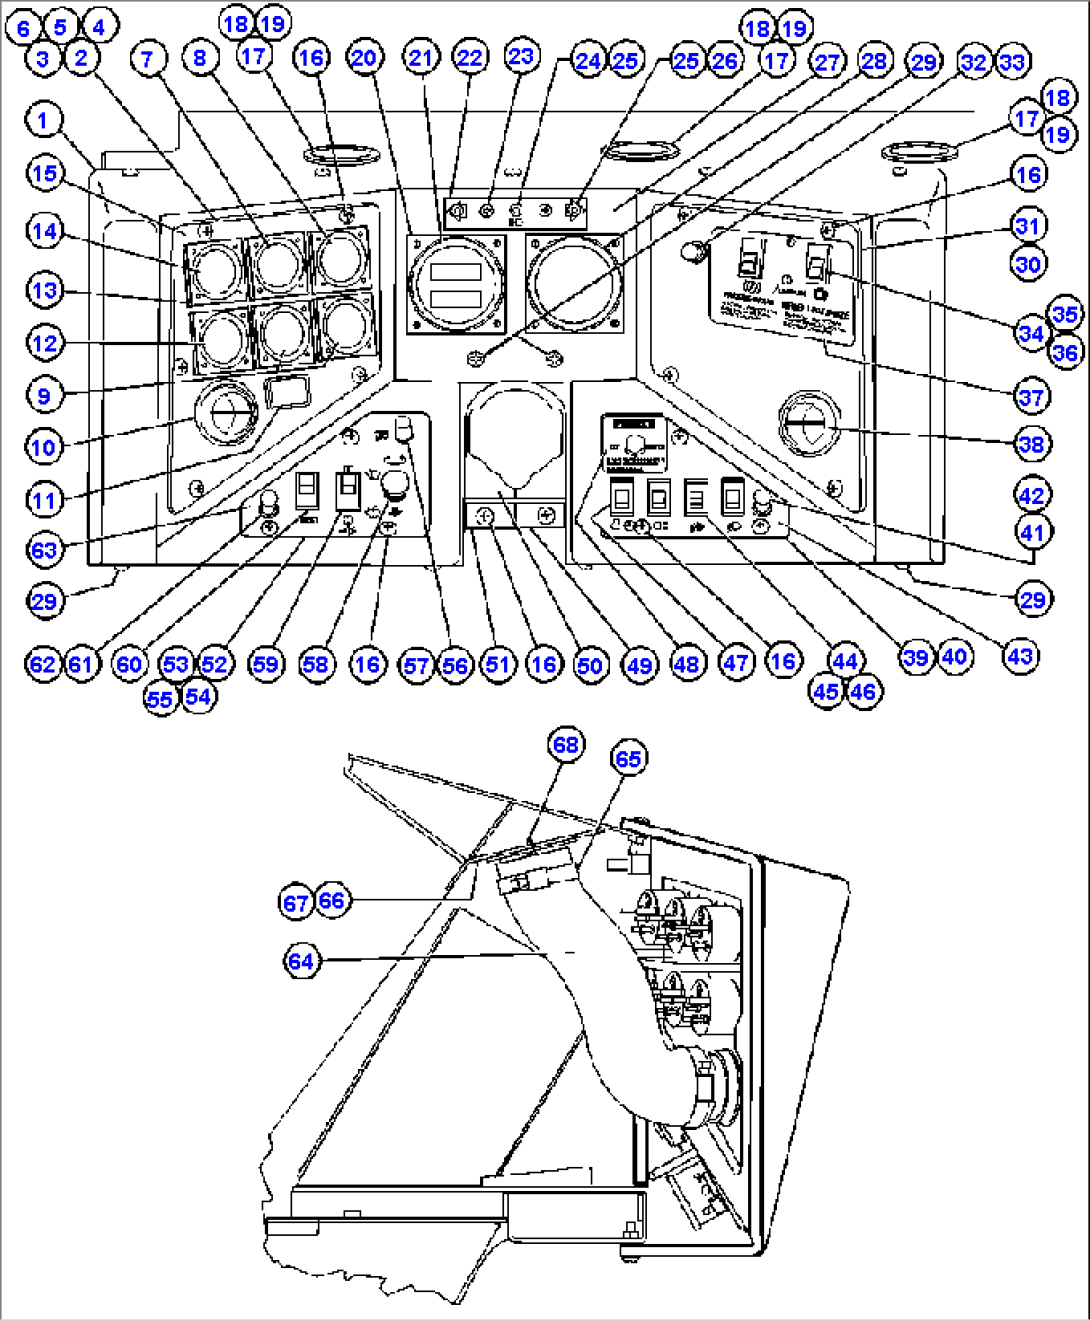 INSTRUMENT PANEL ASSEMBLY